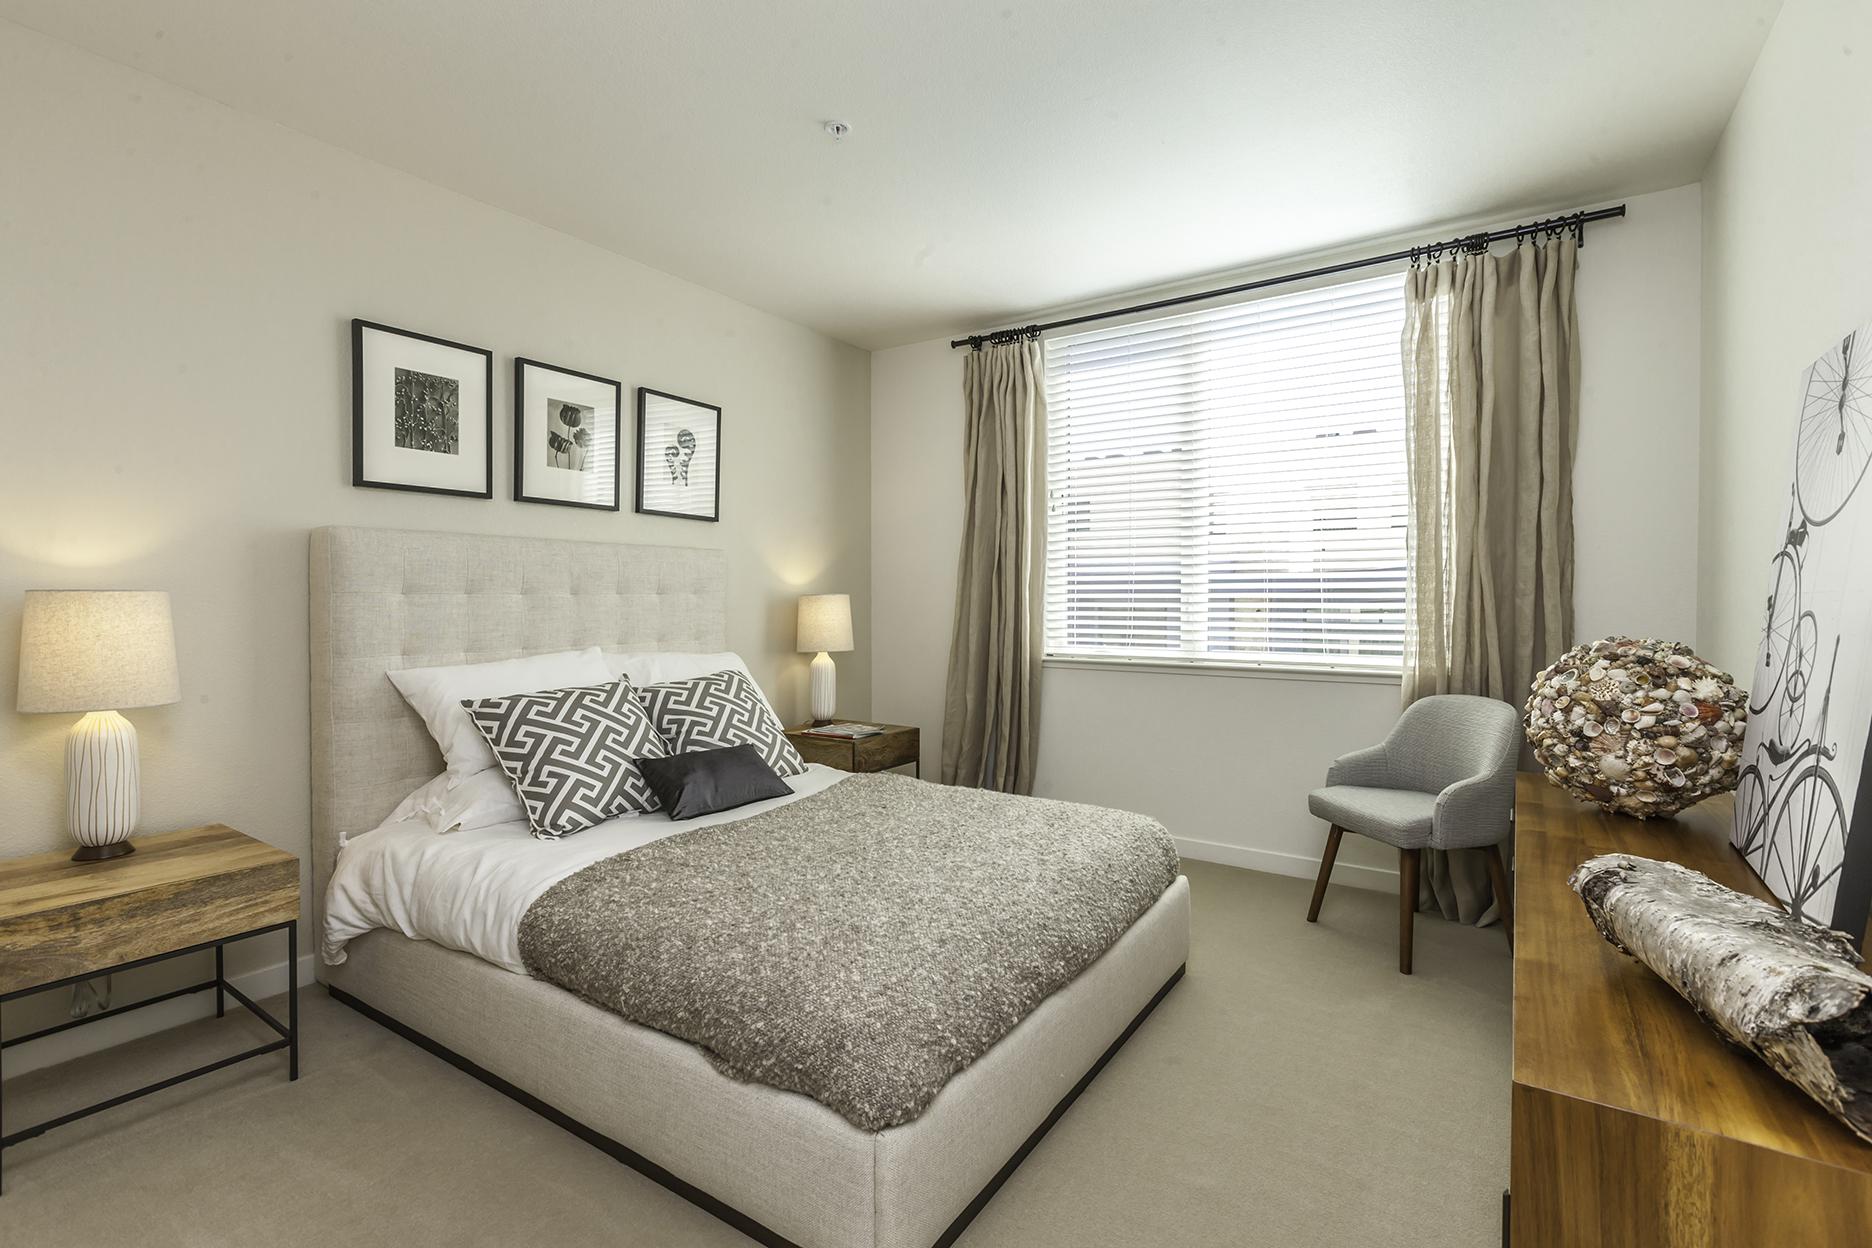 Newly Renovated Apartments in Foster City CA-One Hundred Grand Master Bedroom with Wall to Wall Carpeting and a Large Window Letting in Natural Lighting